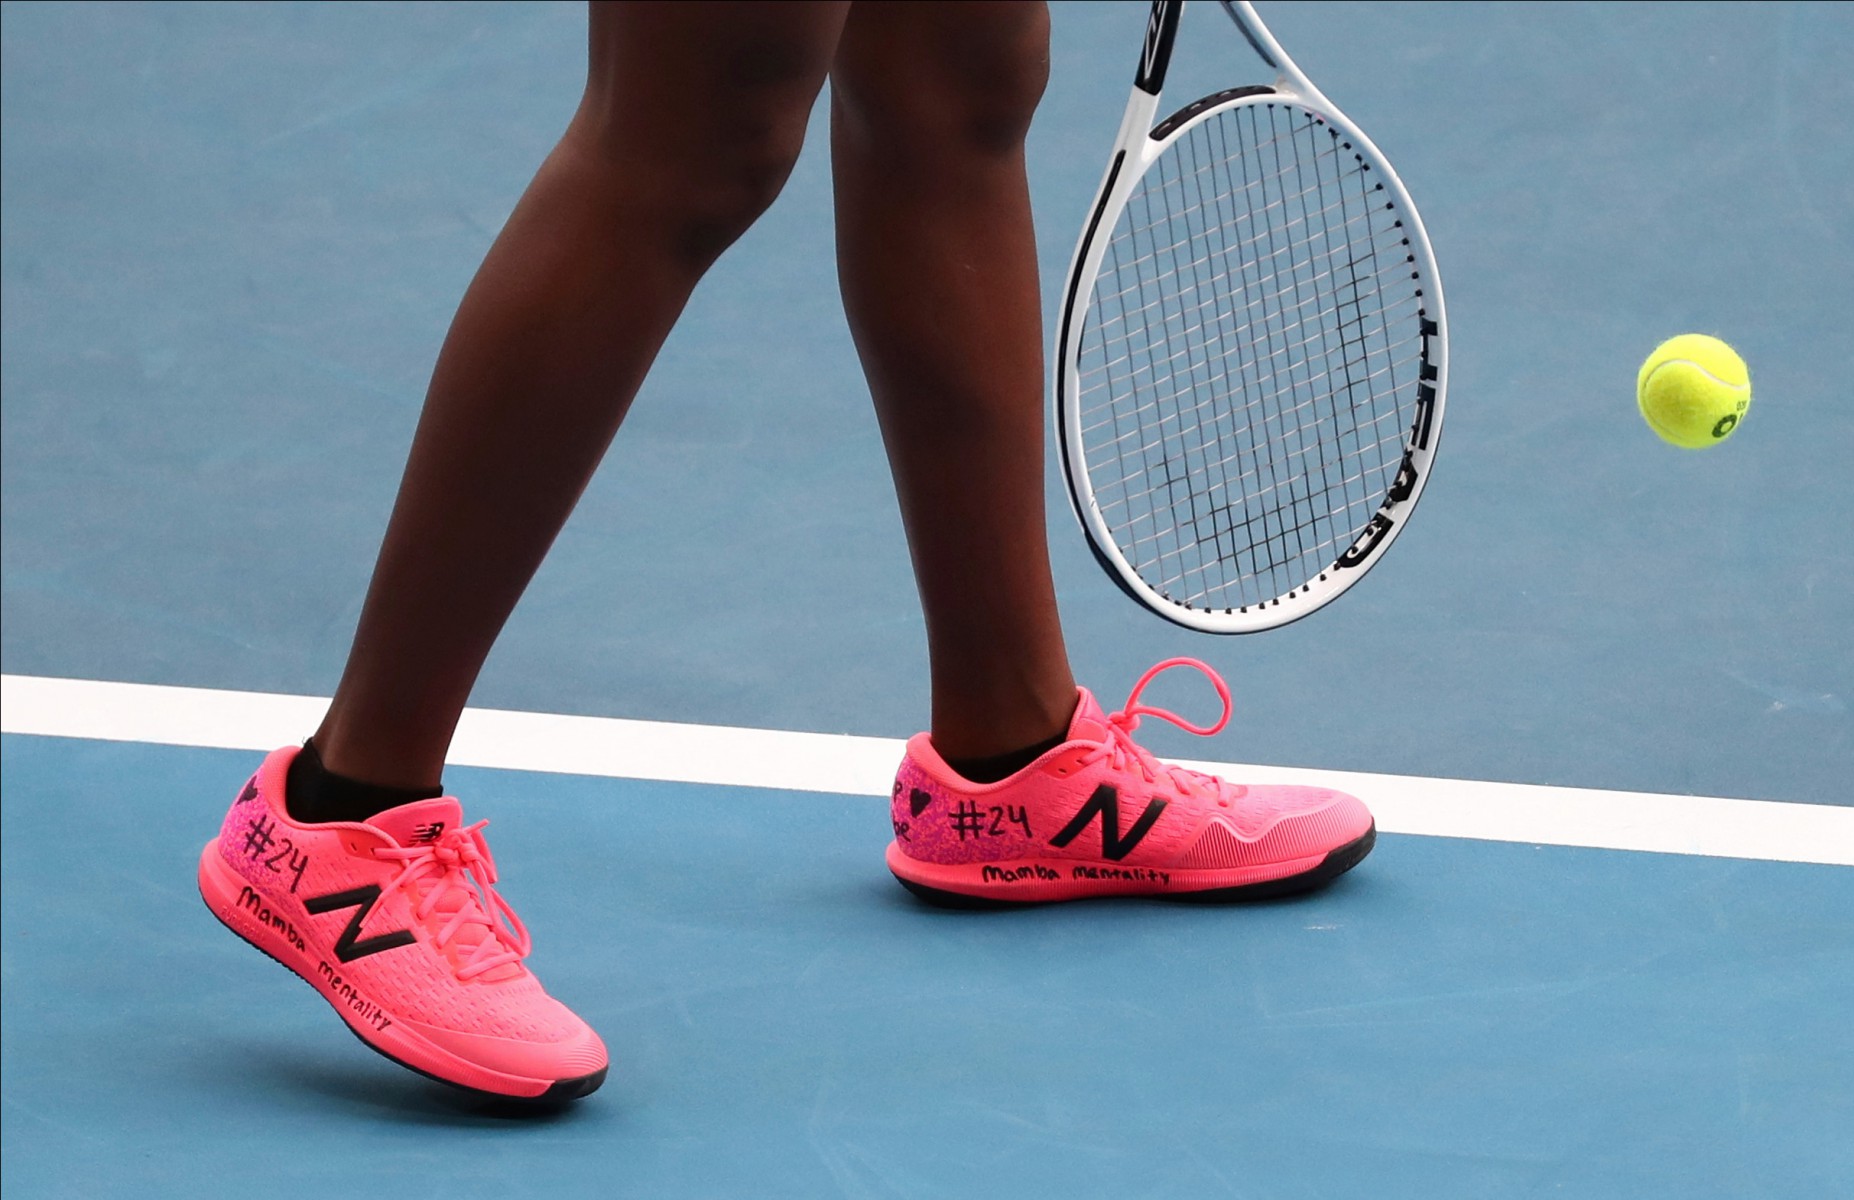 Coco Gauff etched her own personal tribute on to her trainers ahead of her doubles match with Caty McNally